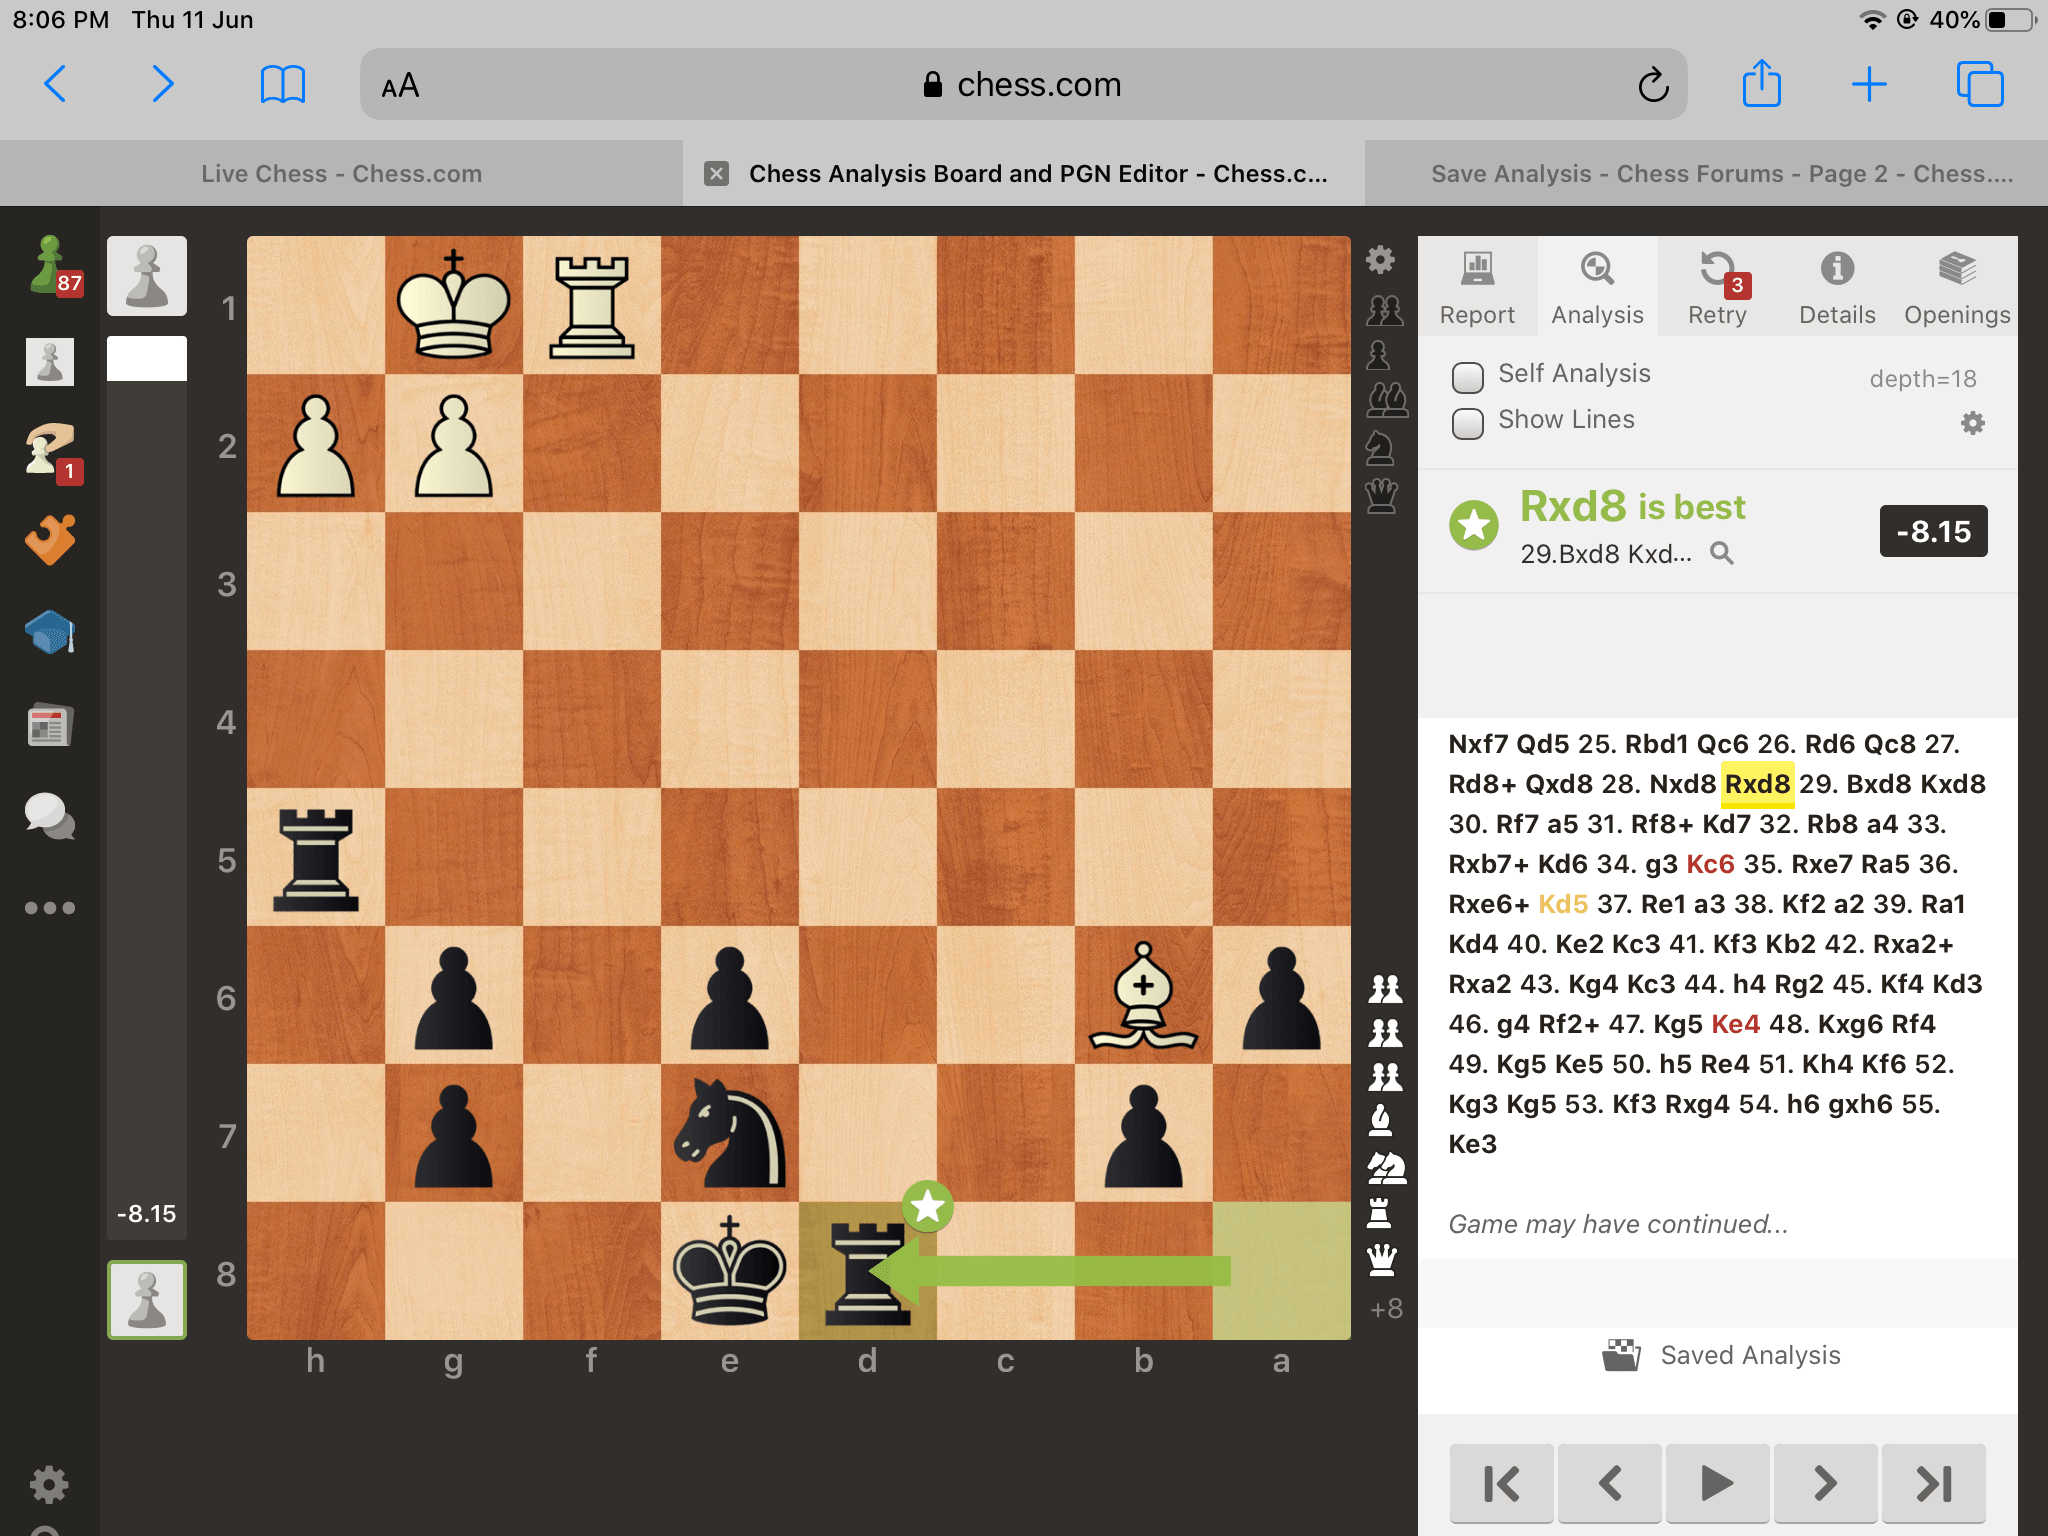 Saved Analysis - Where does the saved analysis go to? - Chess Forums - Chess .com